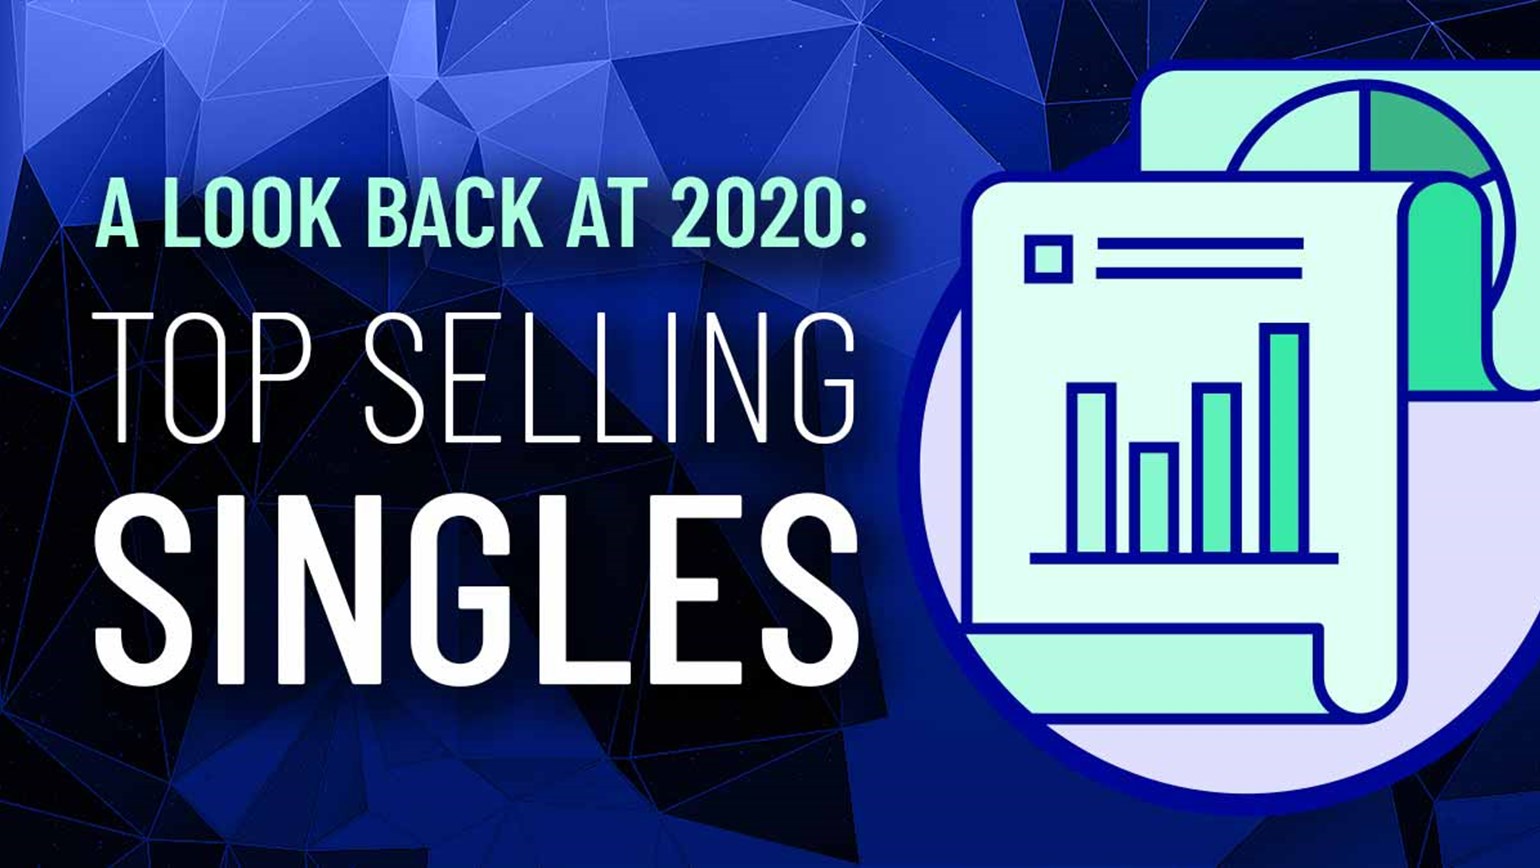 A Look Back at 2020: Top Selling Singles